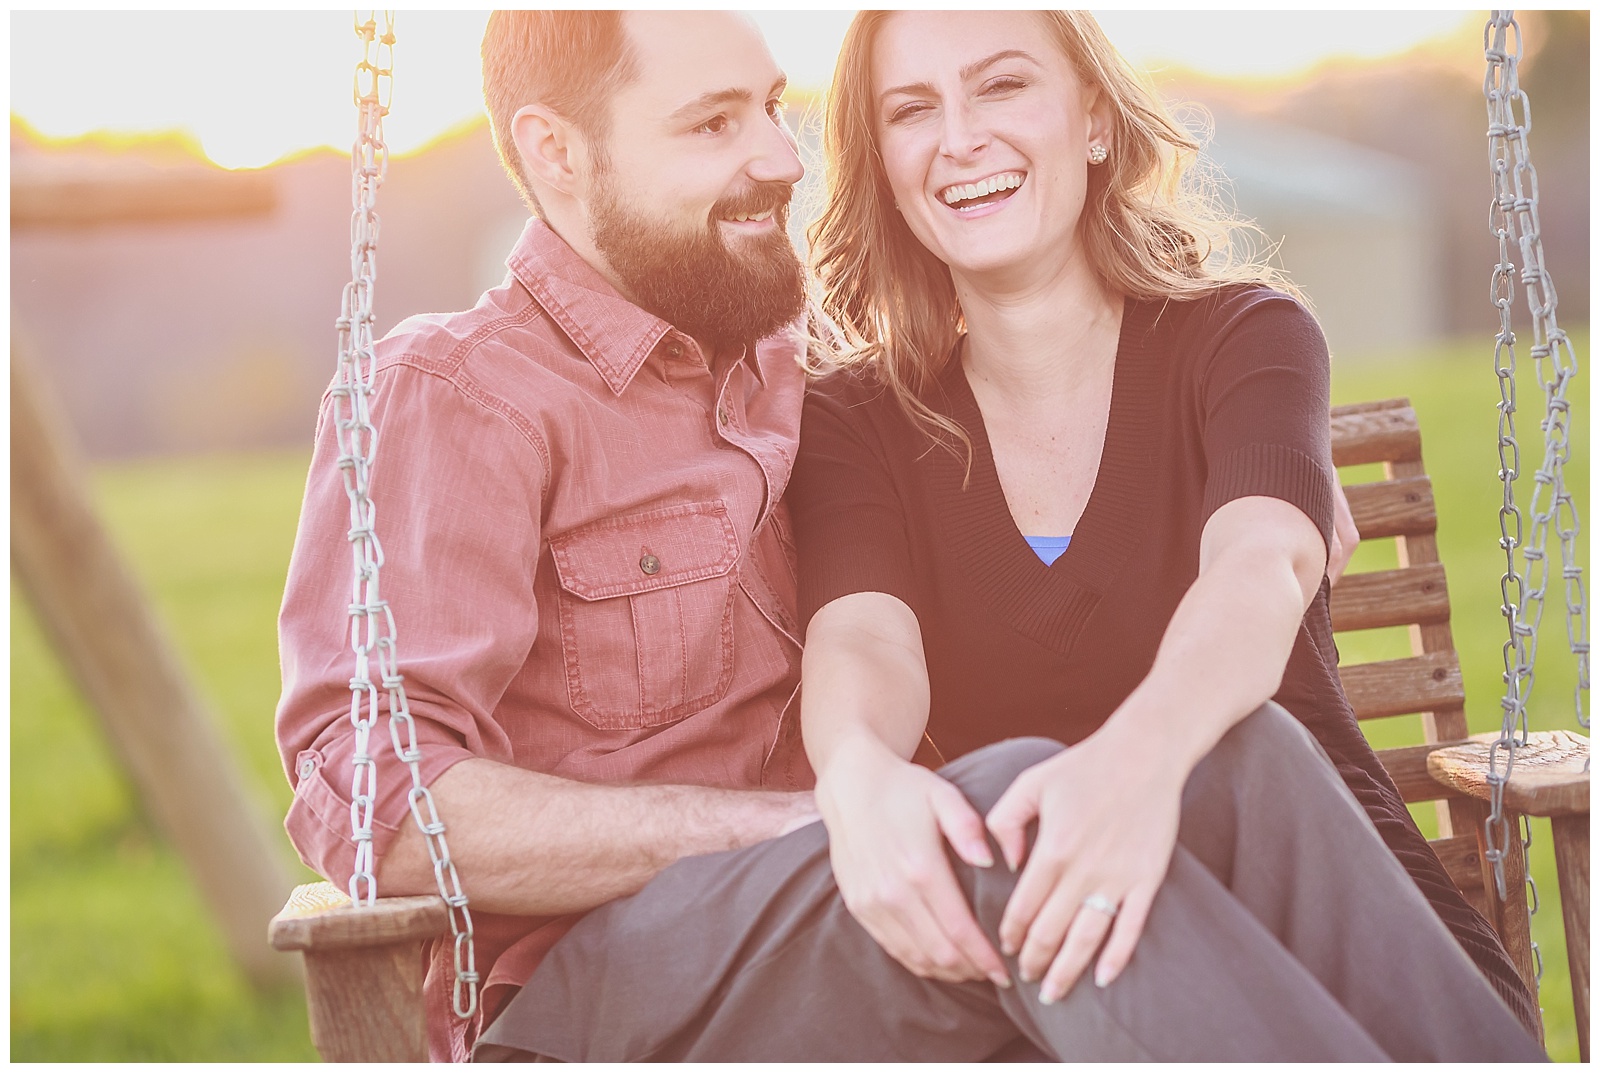 An engagement session in Missouri.